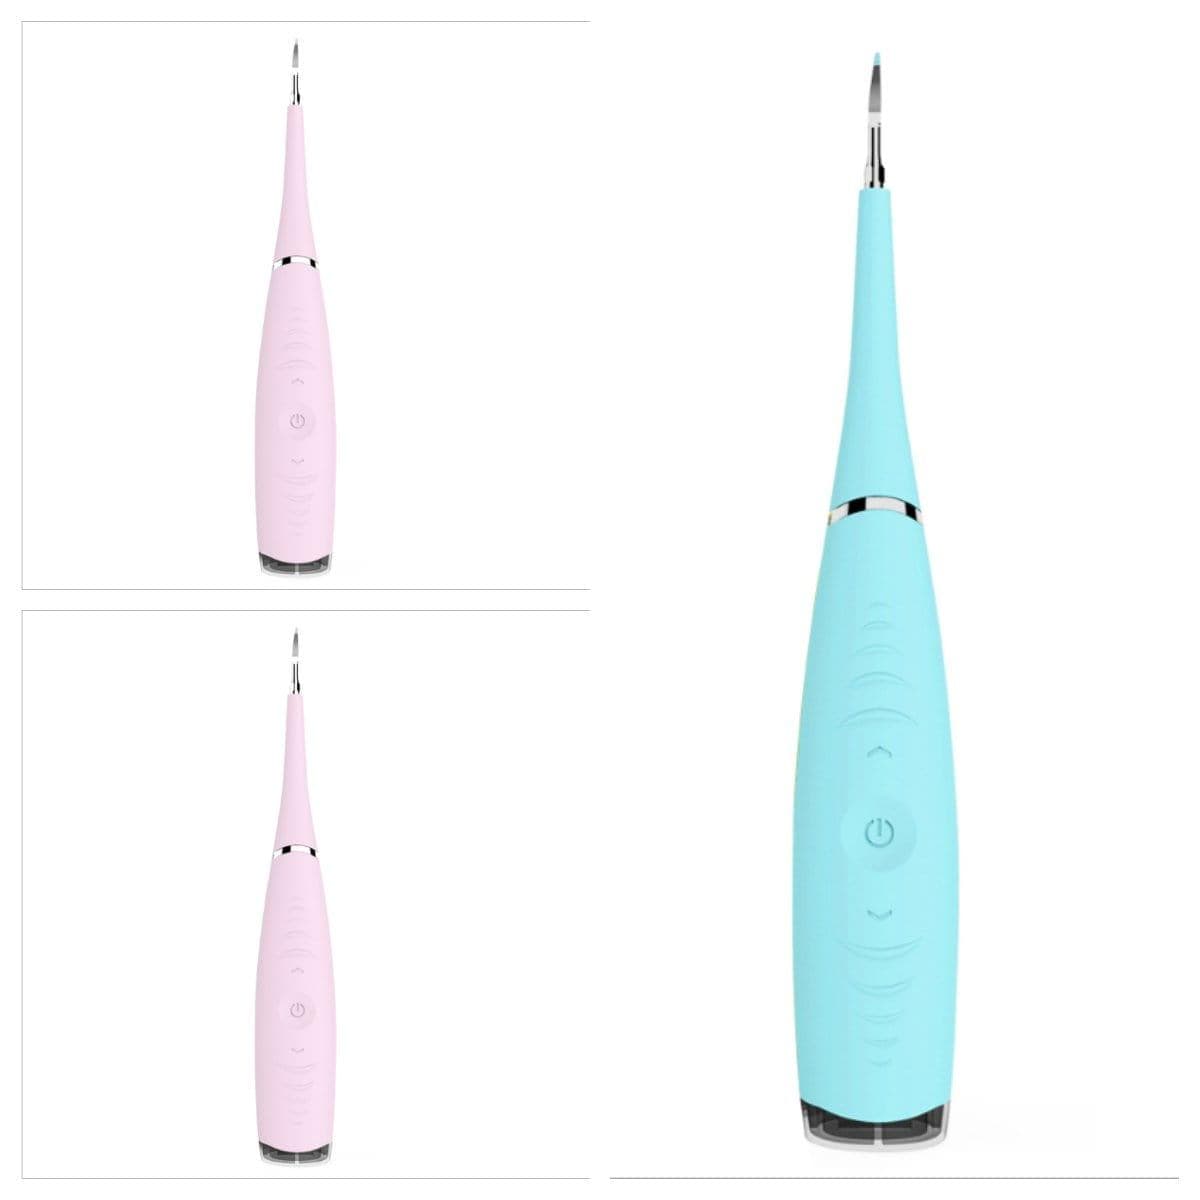 ezy2find tooth scaler 2Pink 1Blue / 3pc Portable Electric Sonic Dental Scaler Tooth Calculus Remover Tooth Stains Tartar Tool Dentist Whiten Teeth Health Hygiene white